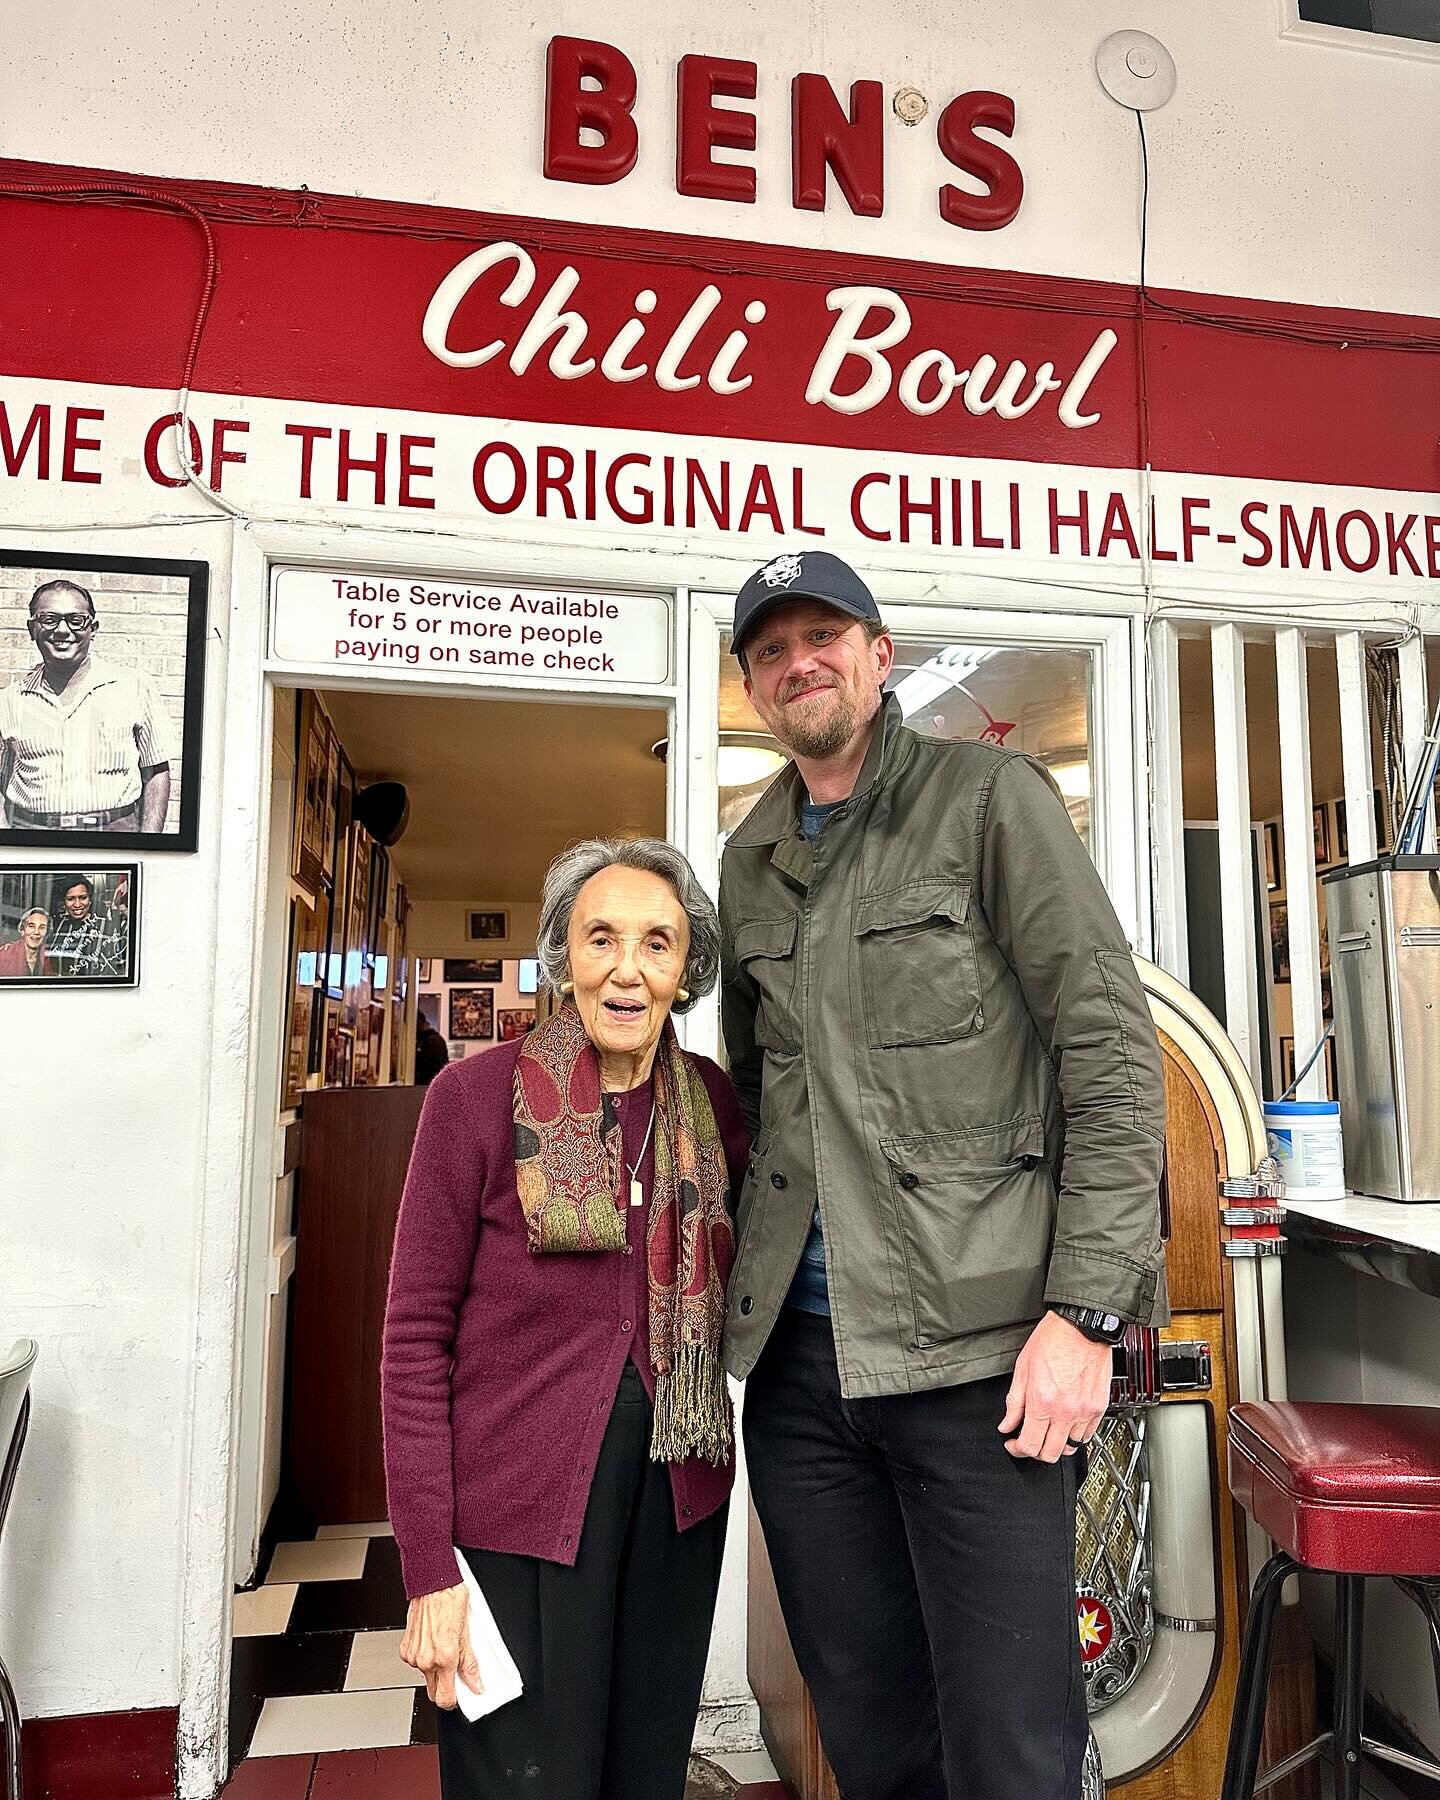 Iconic since 1958, Ben&rsquo;s Chili Bowl in Washington D.C. has been a cherished culinary landmark. Owned by the Ali family, it continues to serve up delicious chili and cultural history.

It was great to meet Virginia Ali, 90, was only 24 when she 